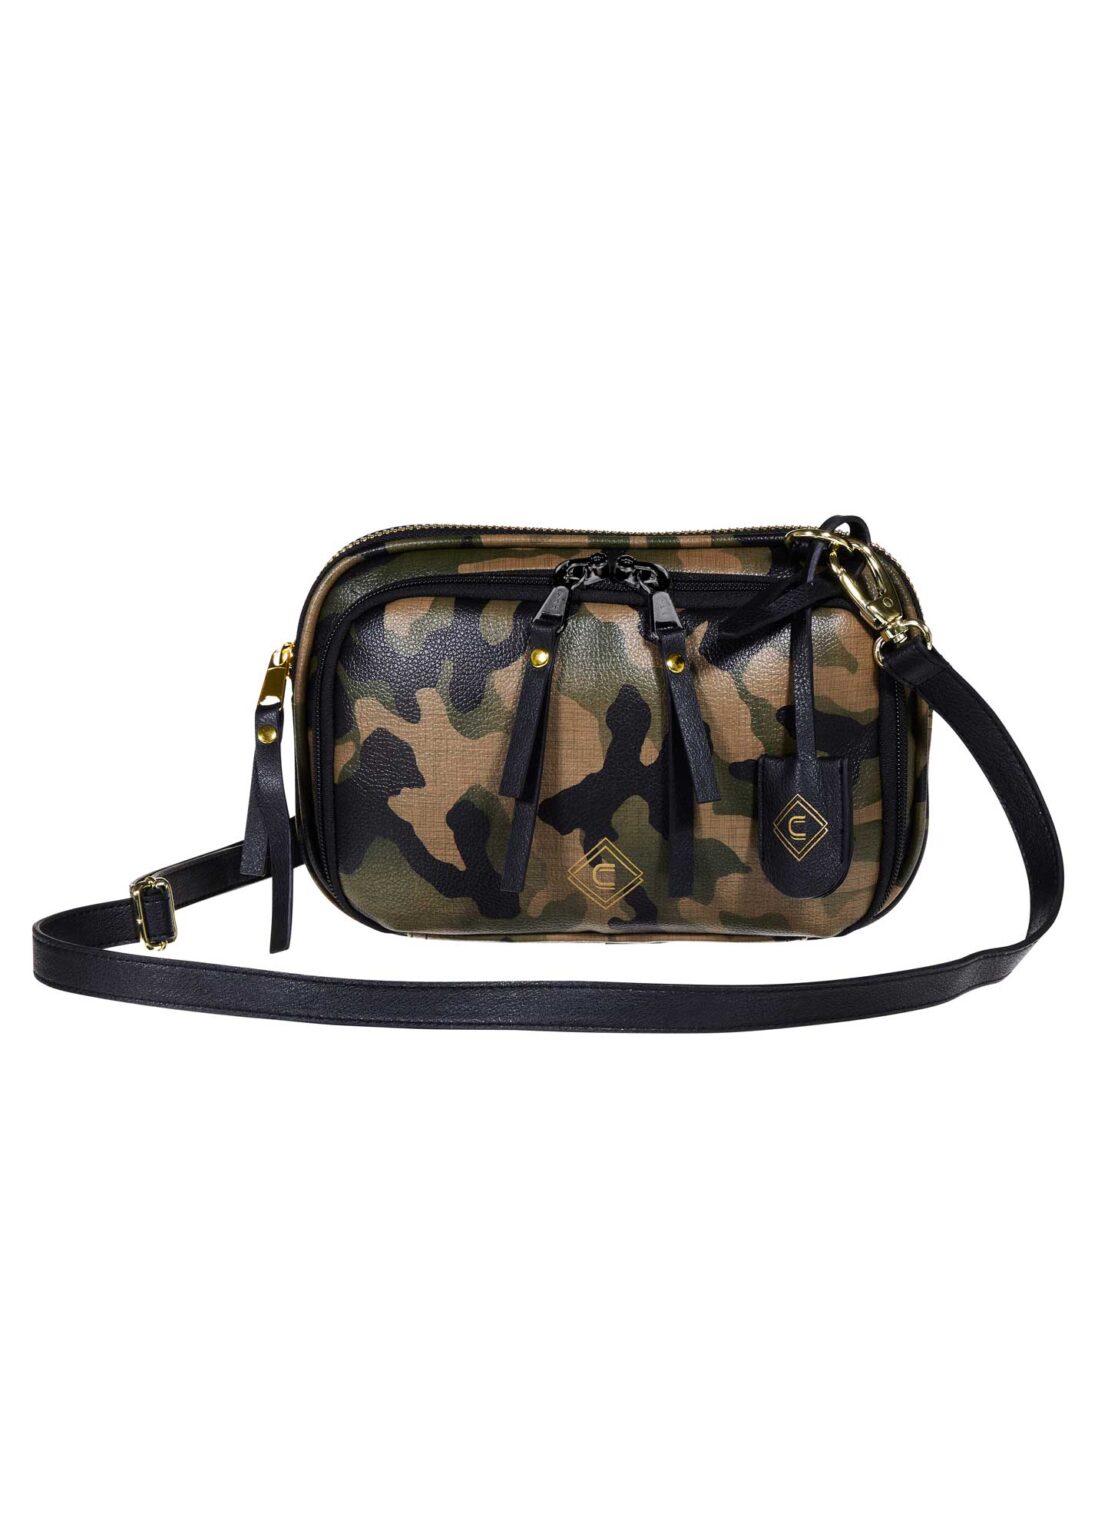 Tomboy Concealed Carry Clutch Purse - Girls With Guns